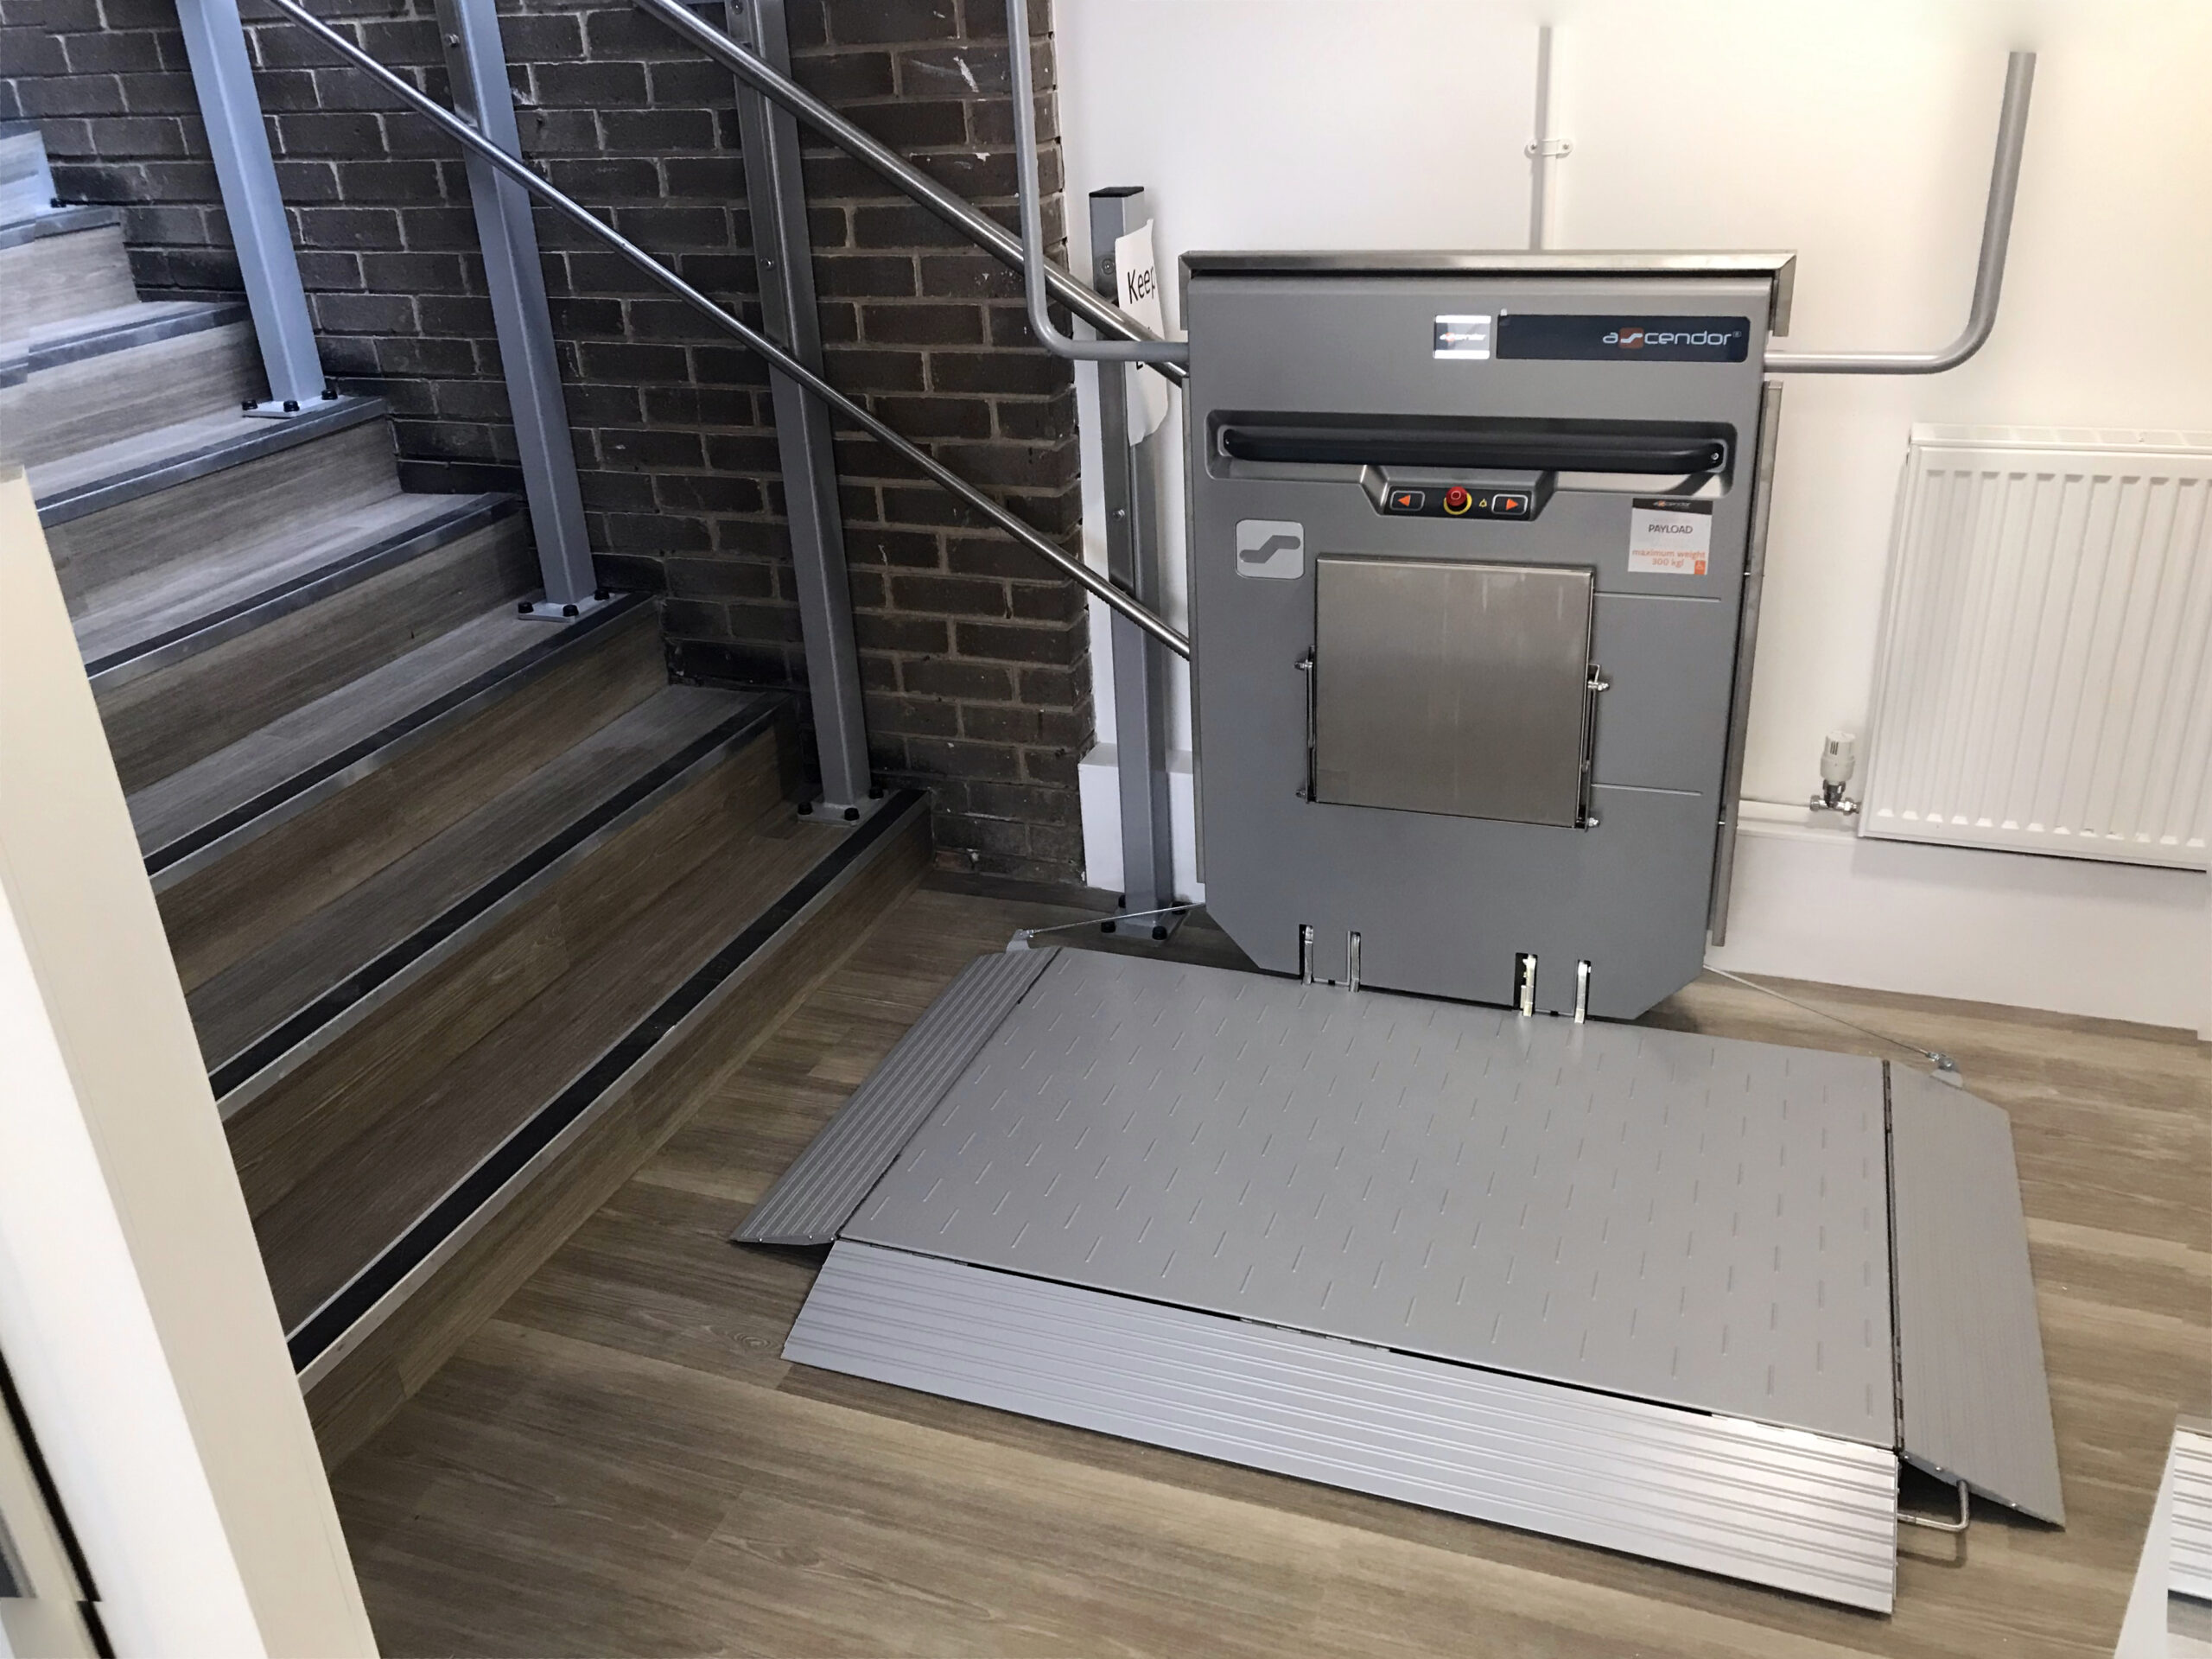 Lift offers accessibility to Community Leisure Centre @Abilityltd